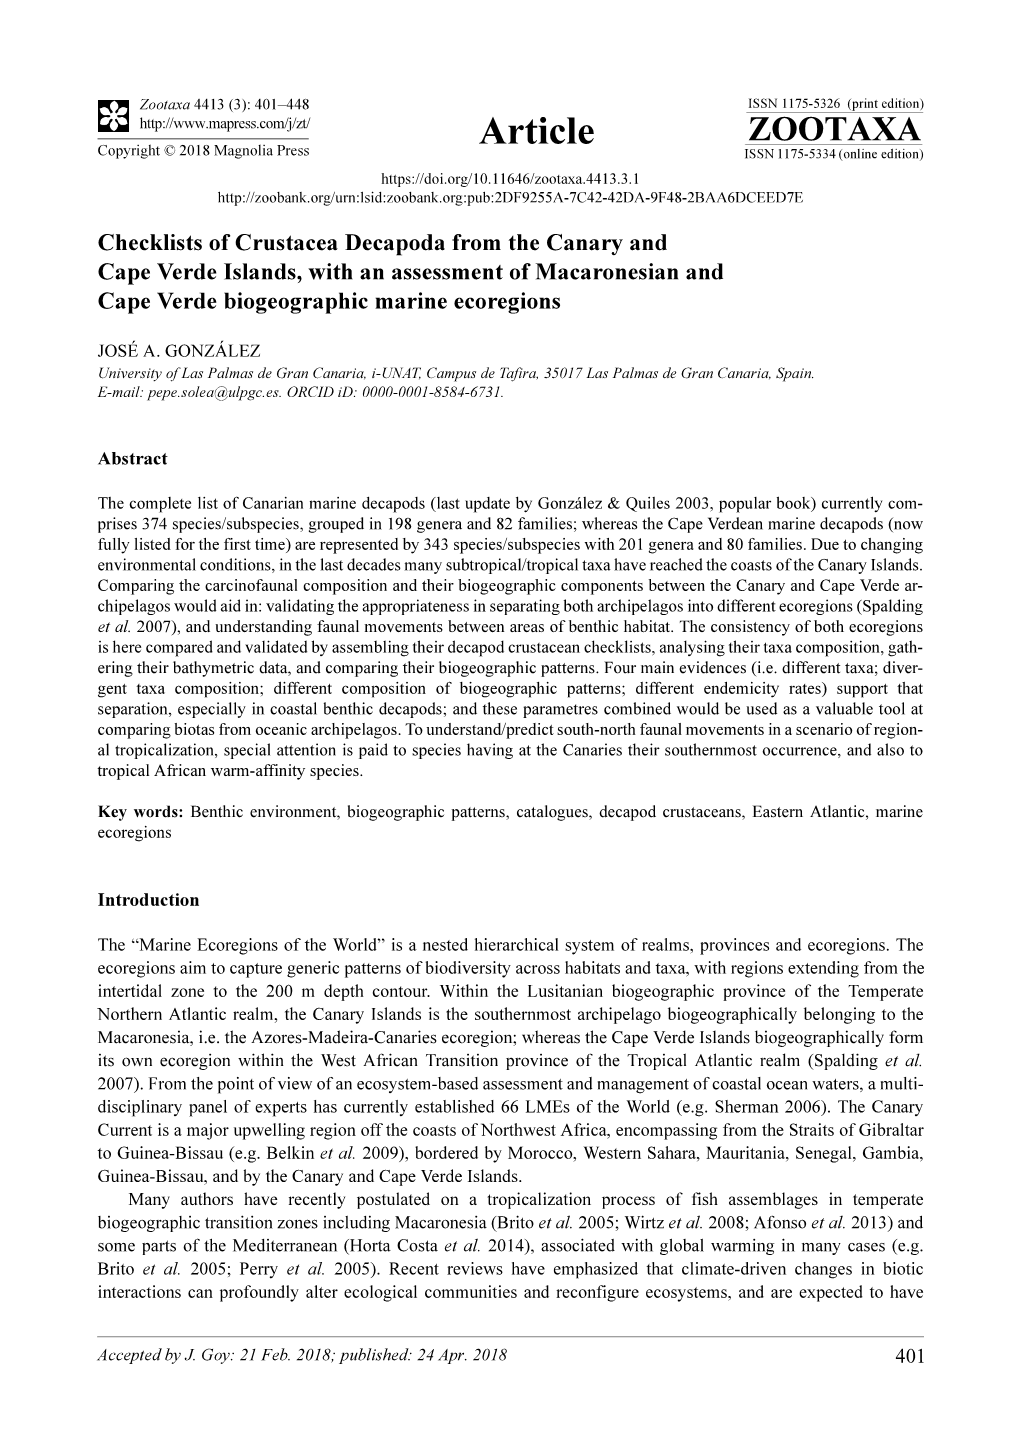 Checklists of Crustacea Decapoda from the Canary and Cape Verde Islands, with an Assessment of Macaronesian and Cape Verde Biogeographic Marine Ecoregions